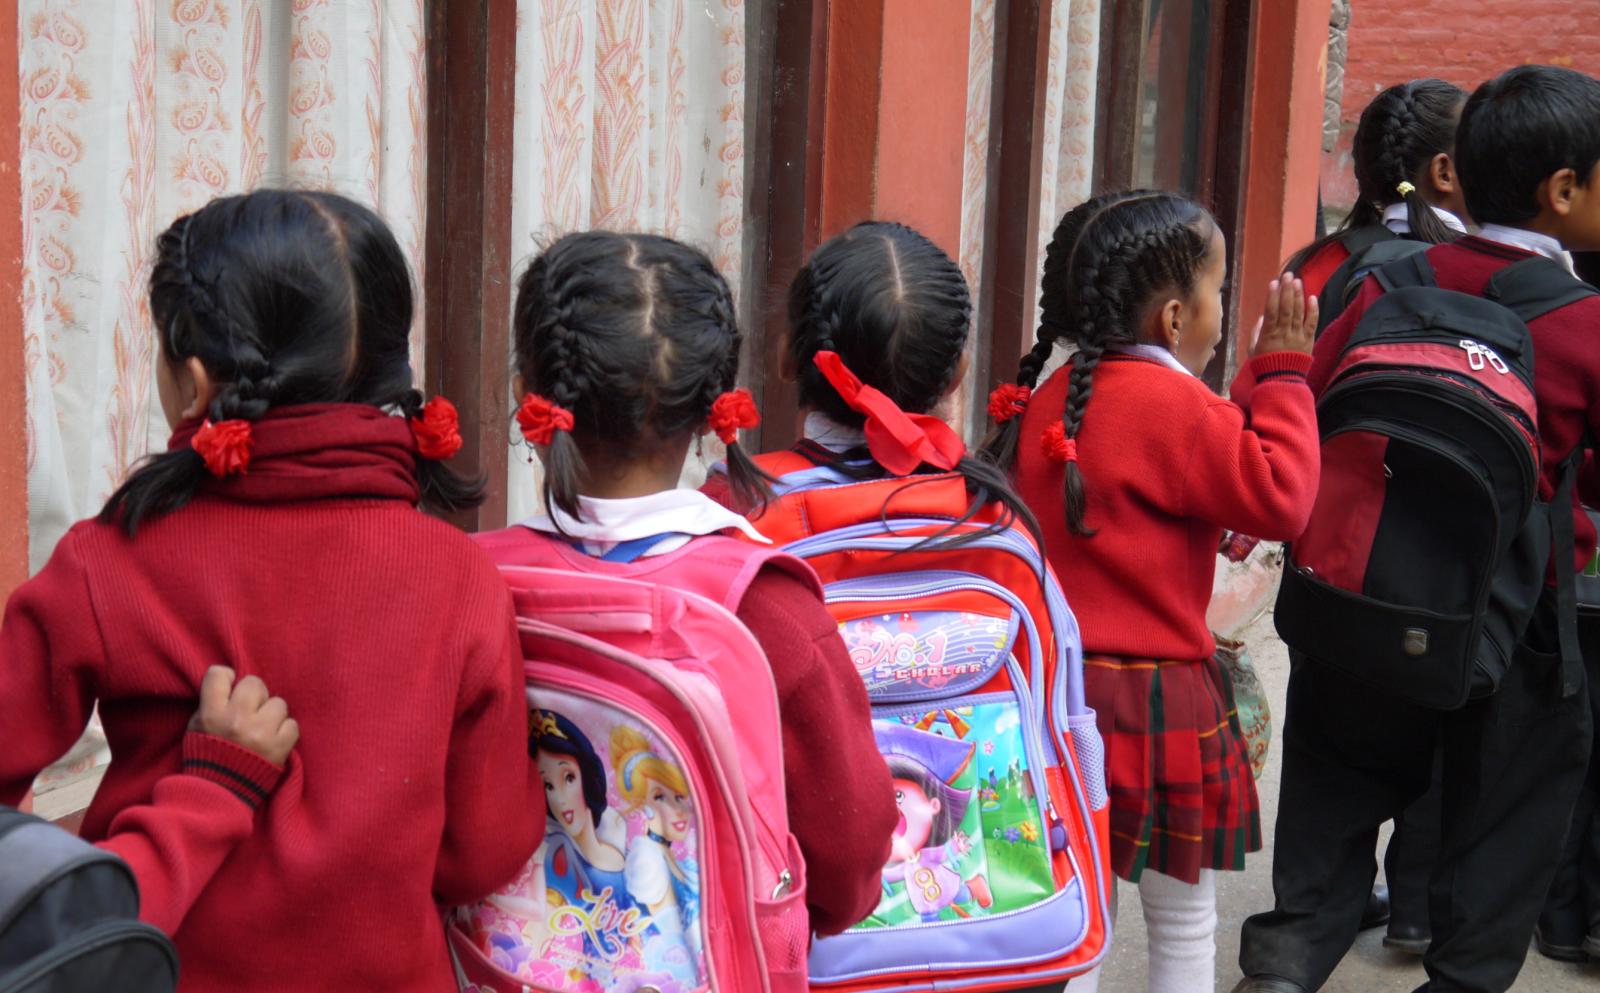 Children line up with their backpacks outside their classroom in Nepal